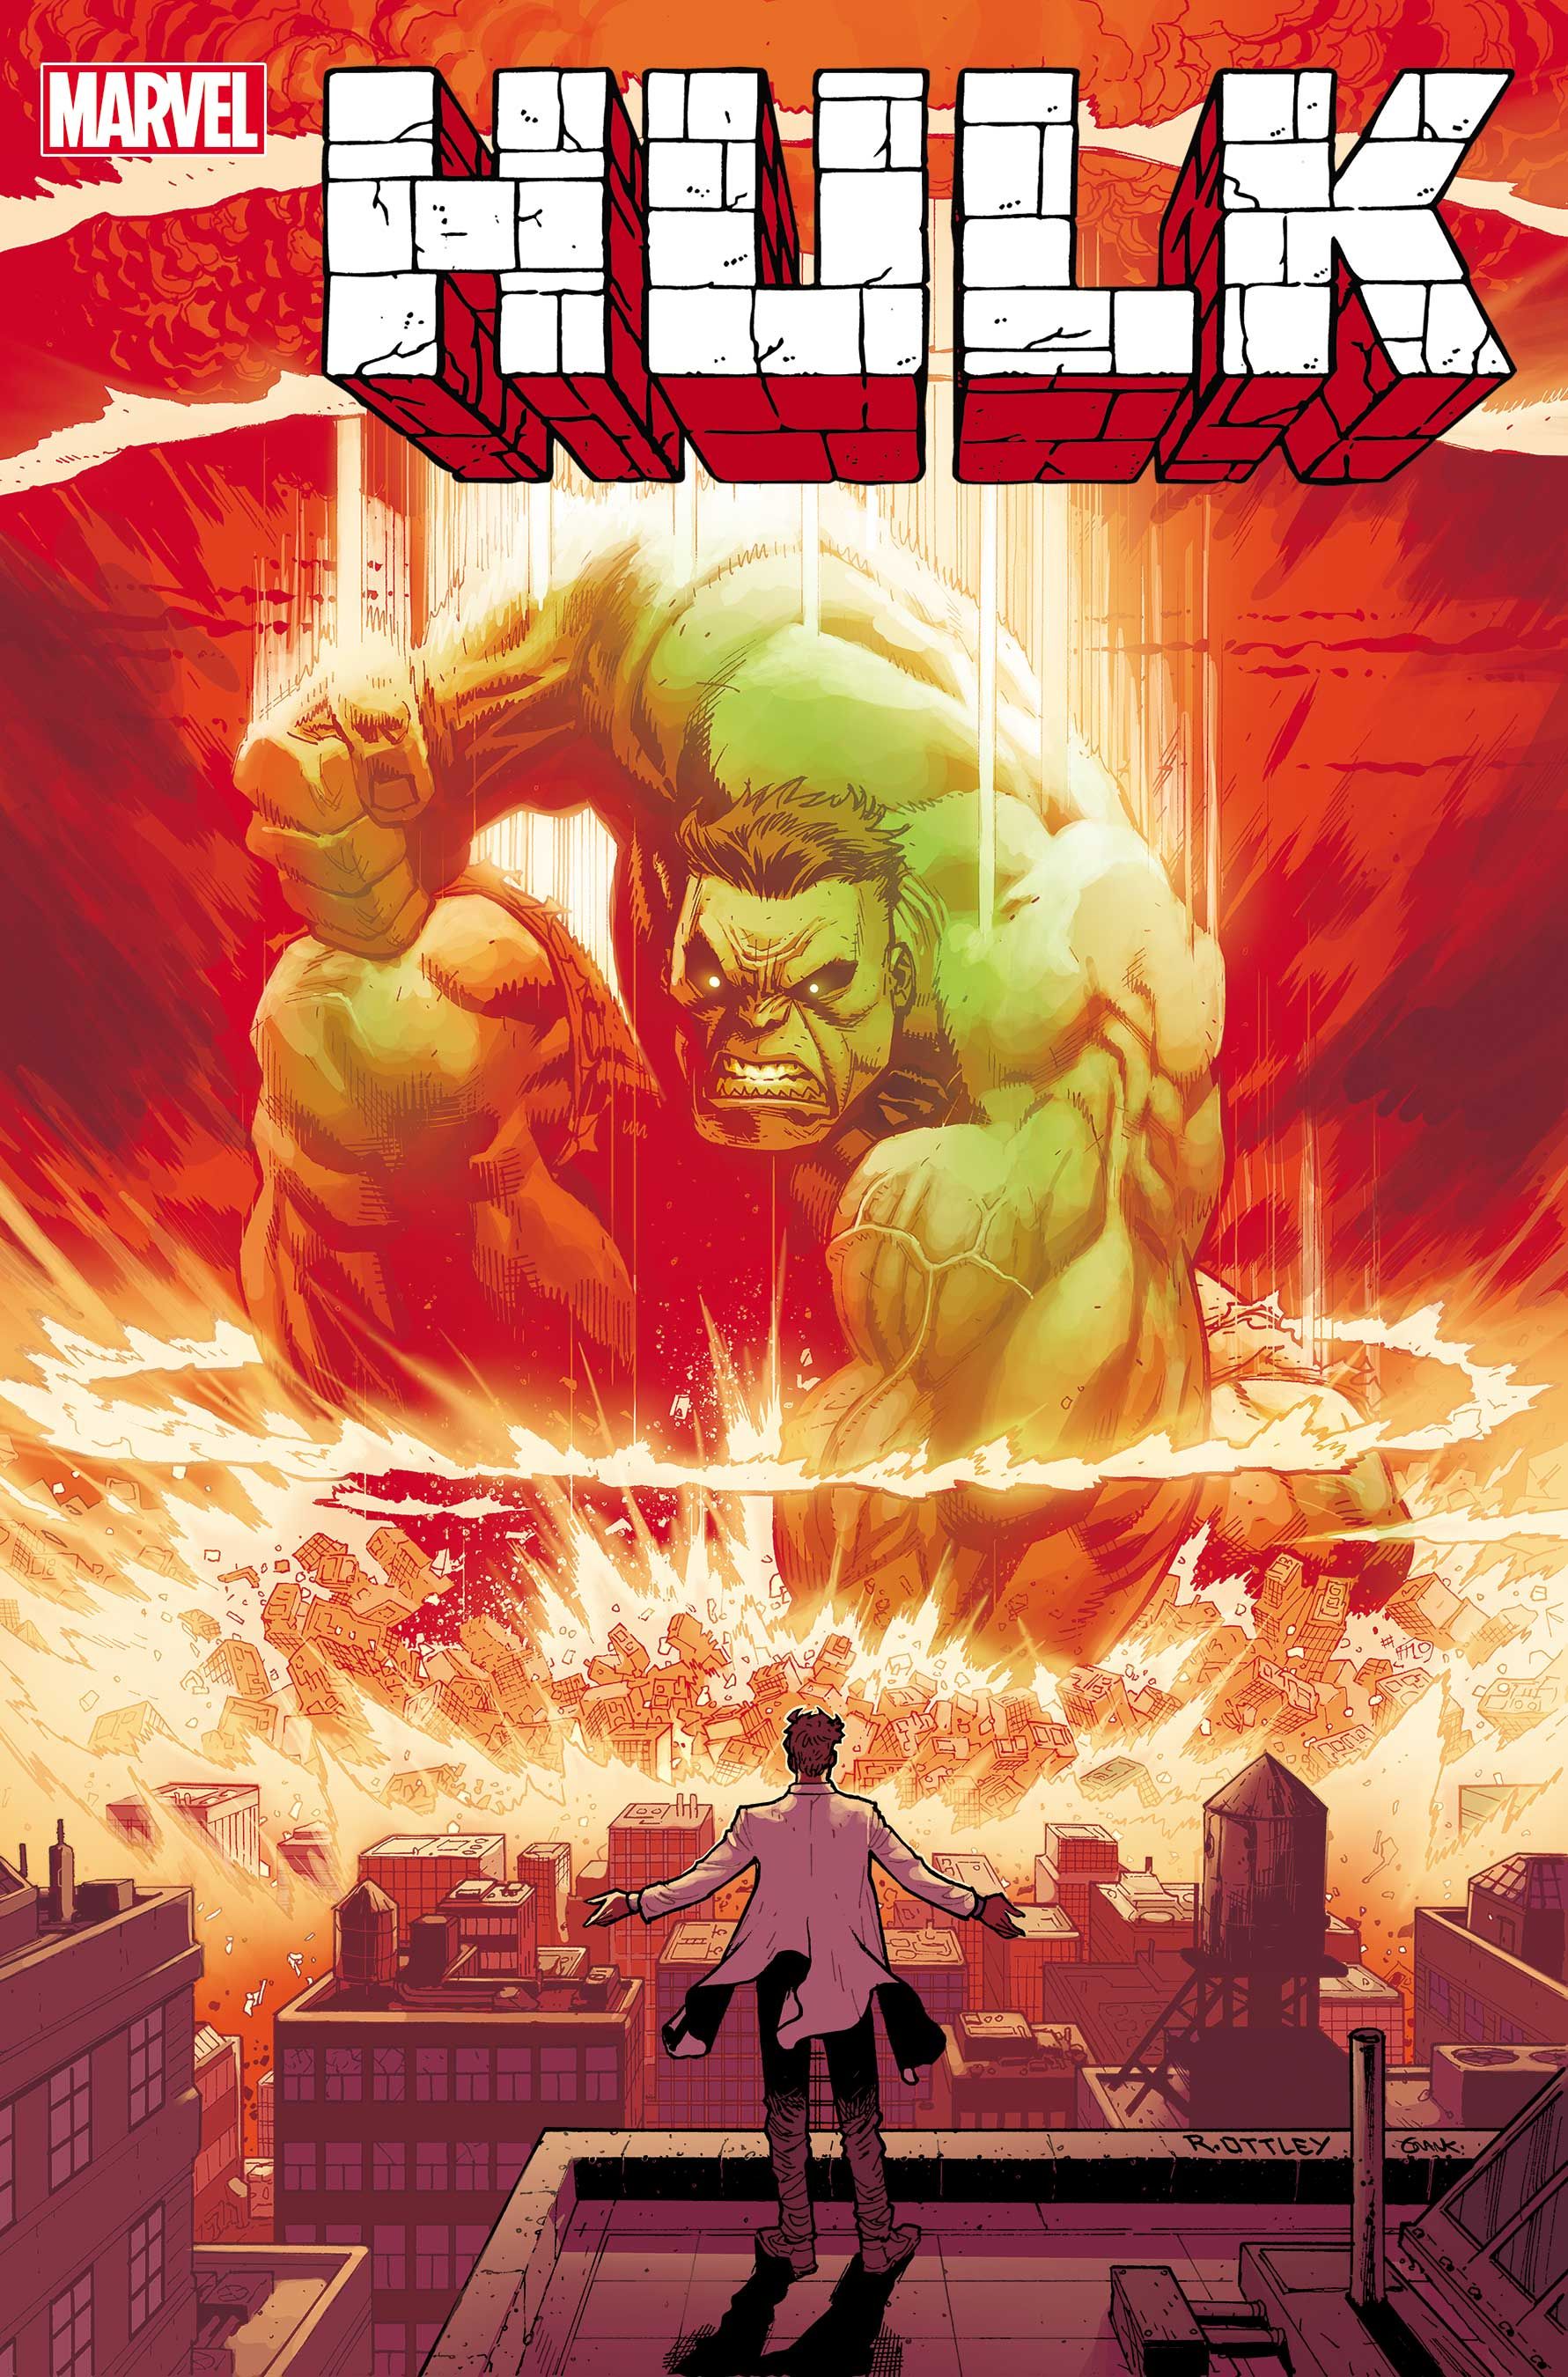 Marvel's Bruce Banner Is More Dangerous Than Hulk in New Comic - Review